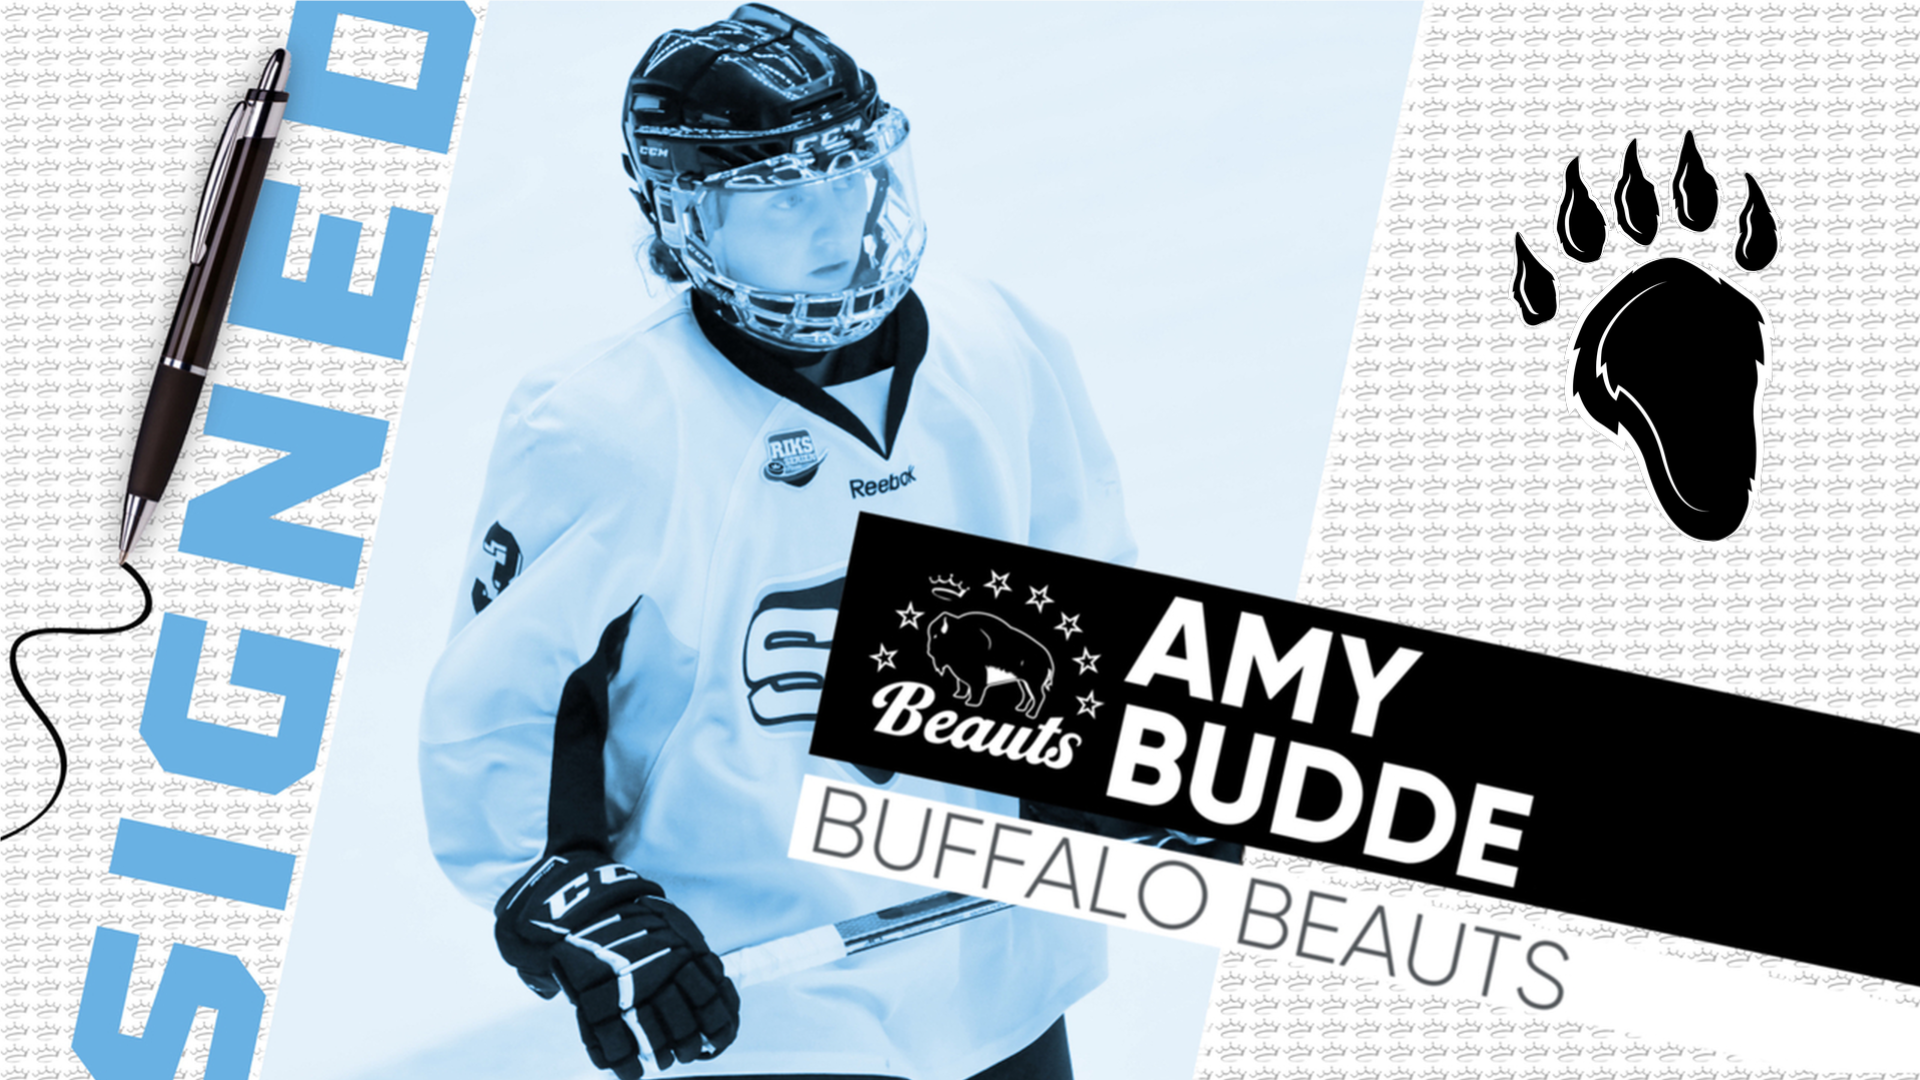 Amy Budde to Continue Professional Career with NWHL's Buffalo Beauts